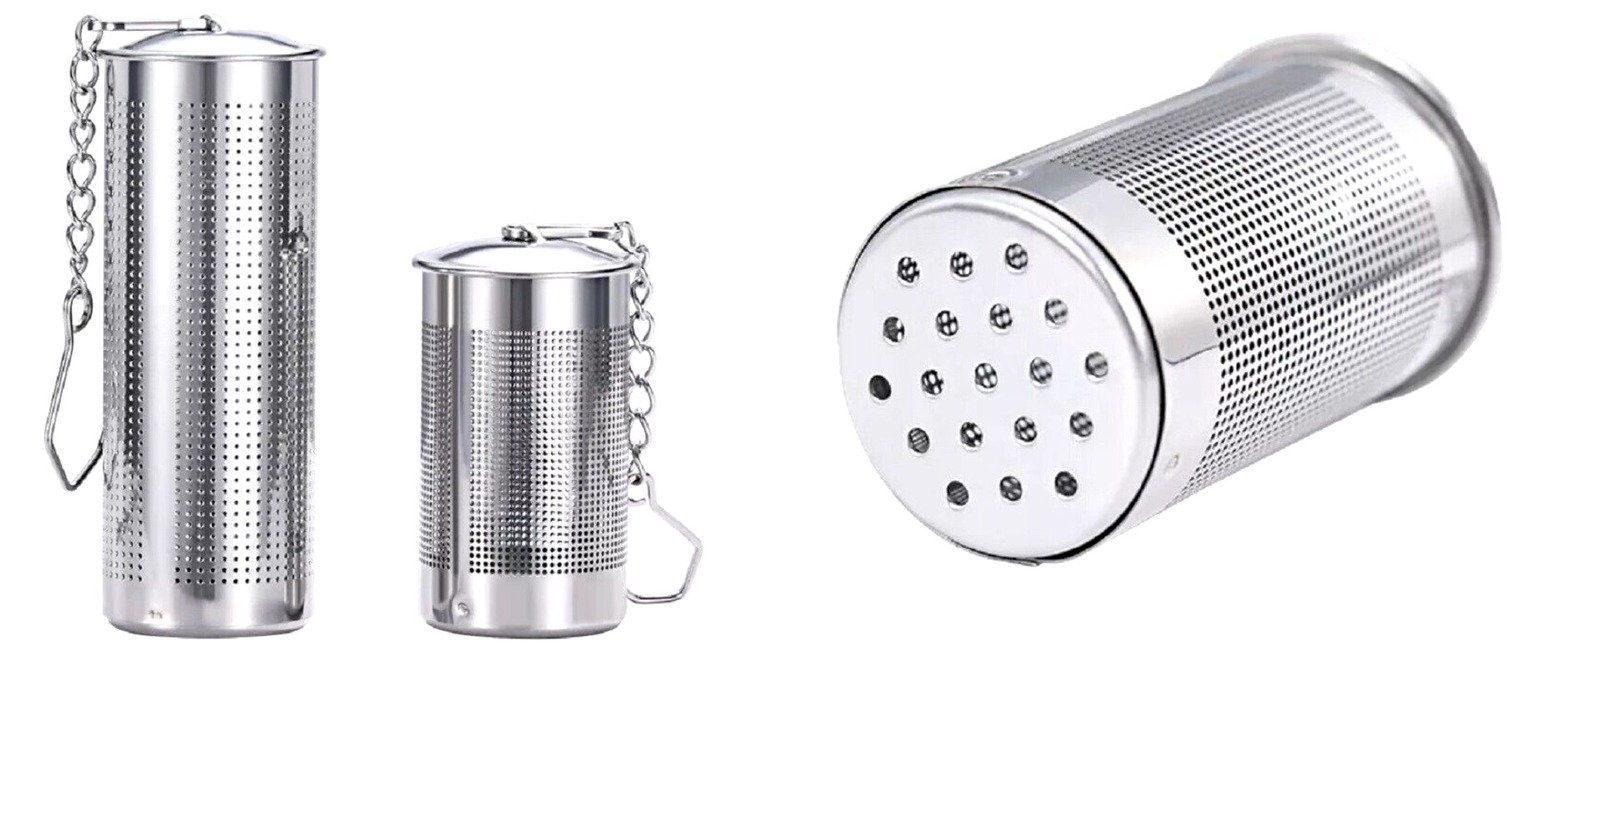 Stainless Steel Tea Infuser & Strainer Fine Mesh Tea Ball with Chain Hook 2 Pcs  - $20.99